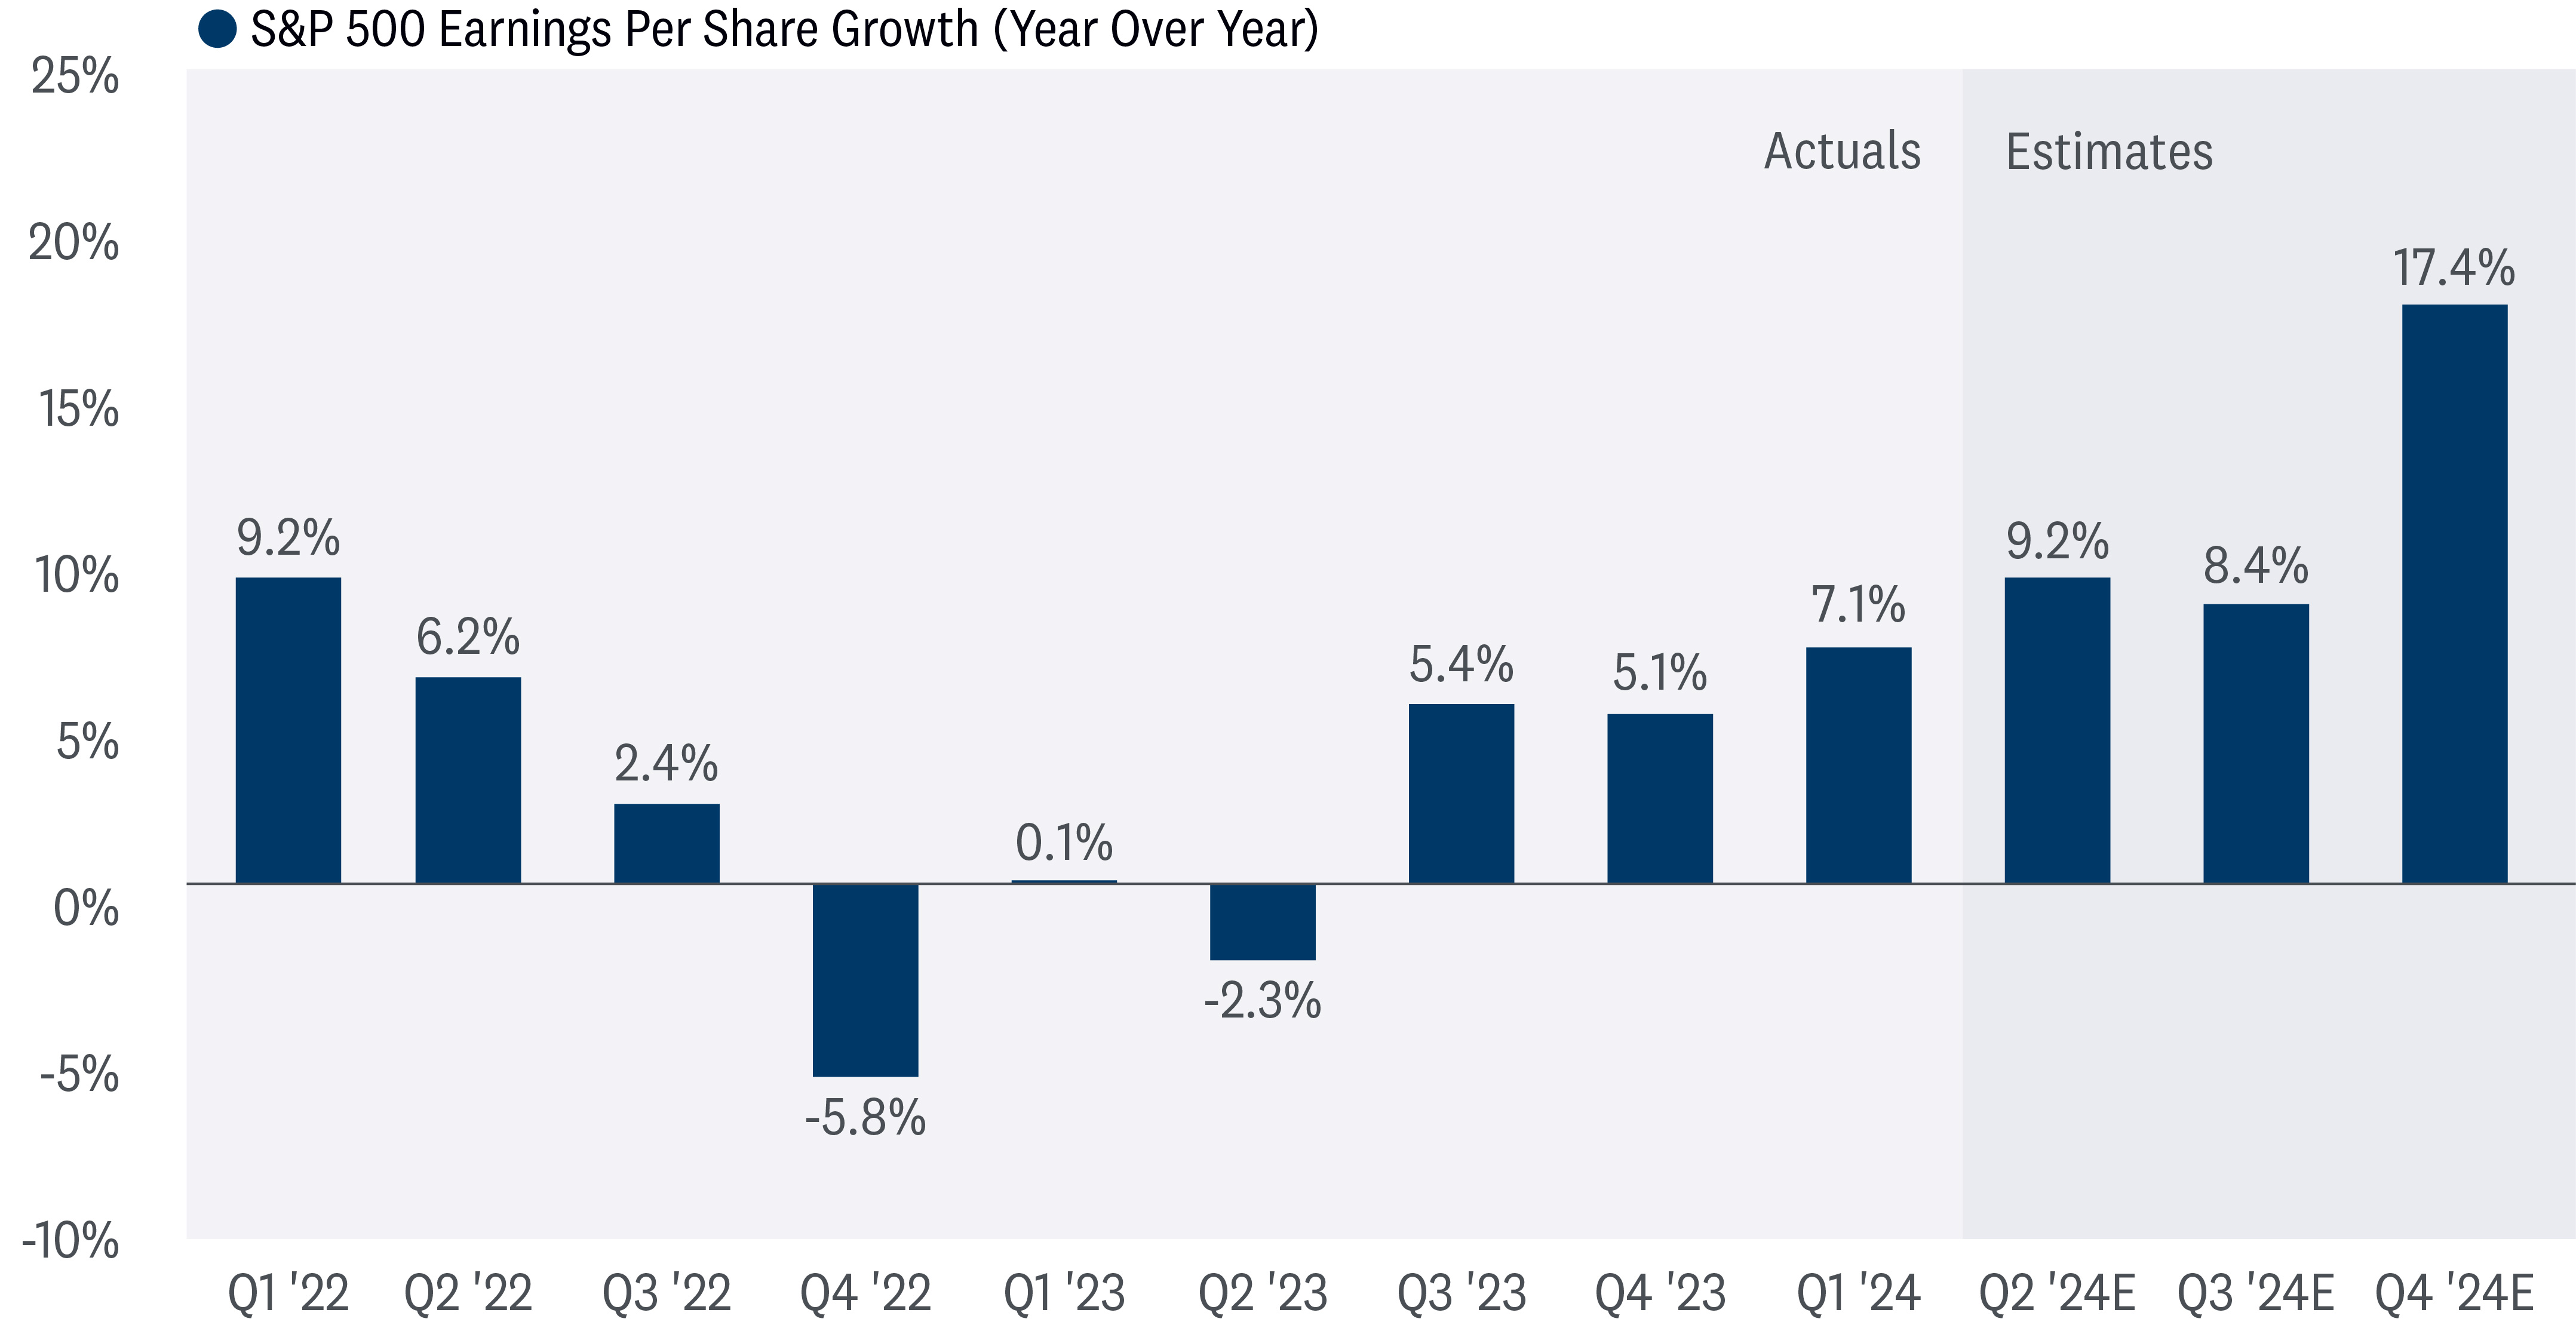 The chart depicts the S&P 500 earnings per share growth year over year, with actuals and estimates. The chart covers the period from Q1 2022 to Q4 2024. Overall, the chart depicts that earnings per share growth has been volatile, but has trended upwards in recent quarters. The estimates for the next few quarters are also positive.